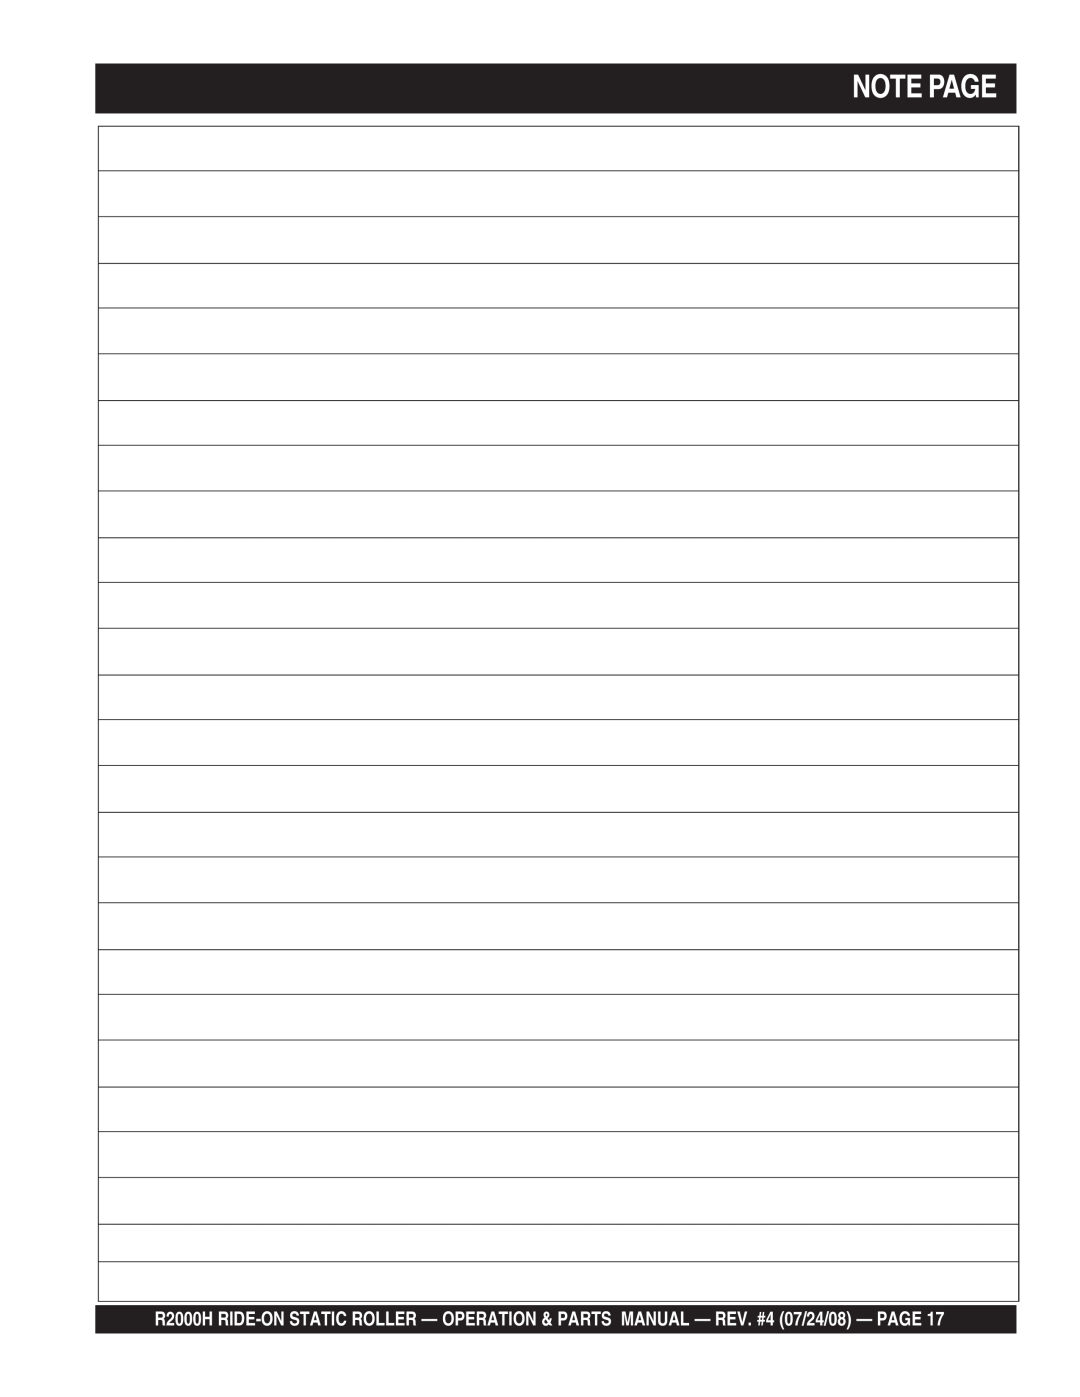 Multiquip R2000H manual Note Page 